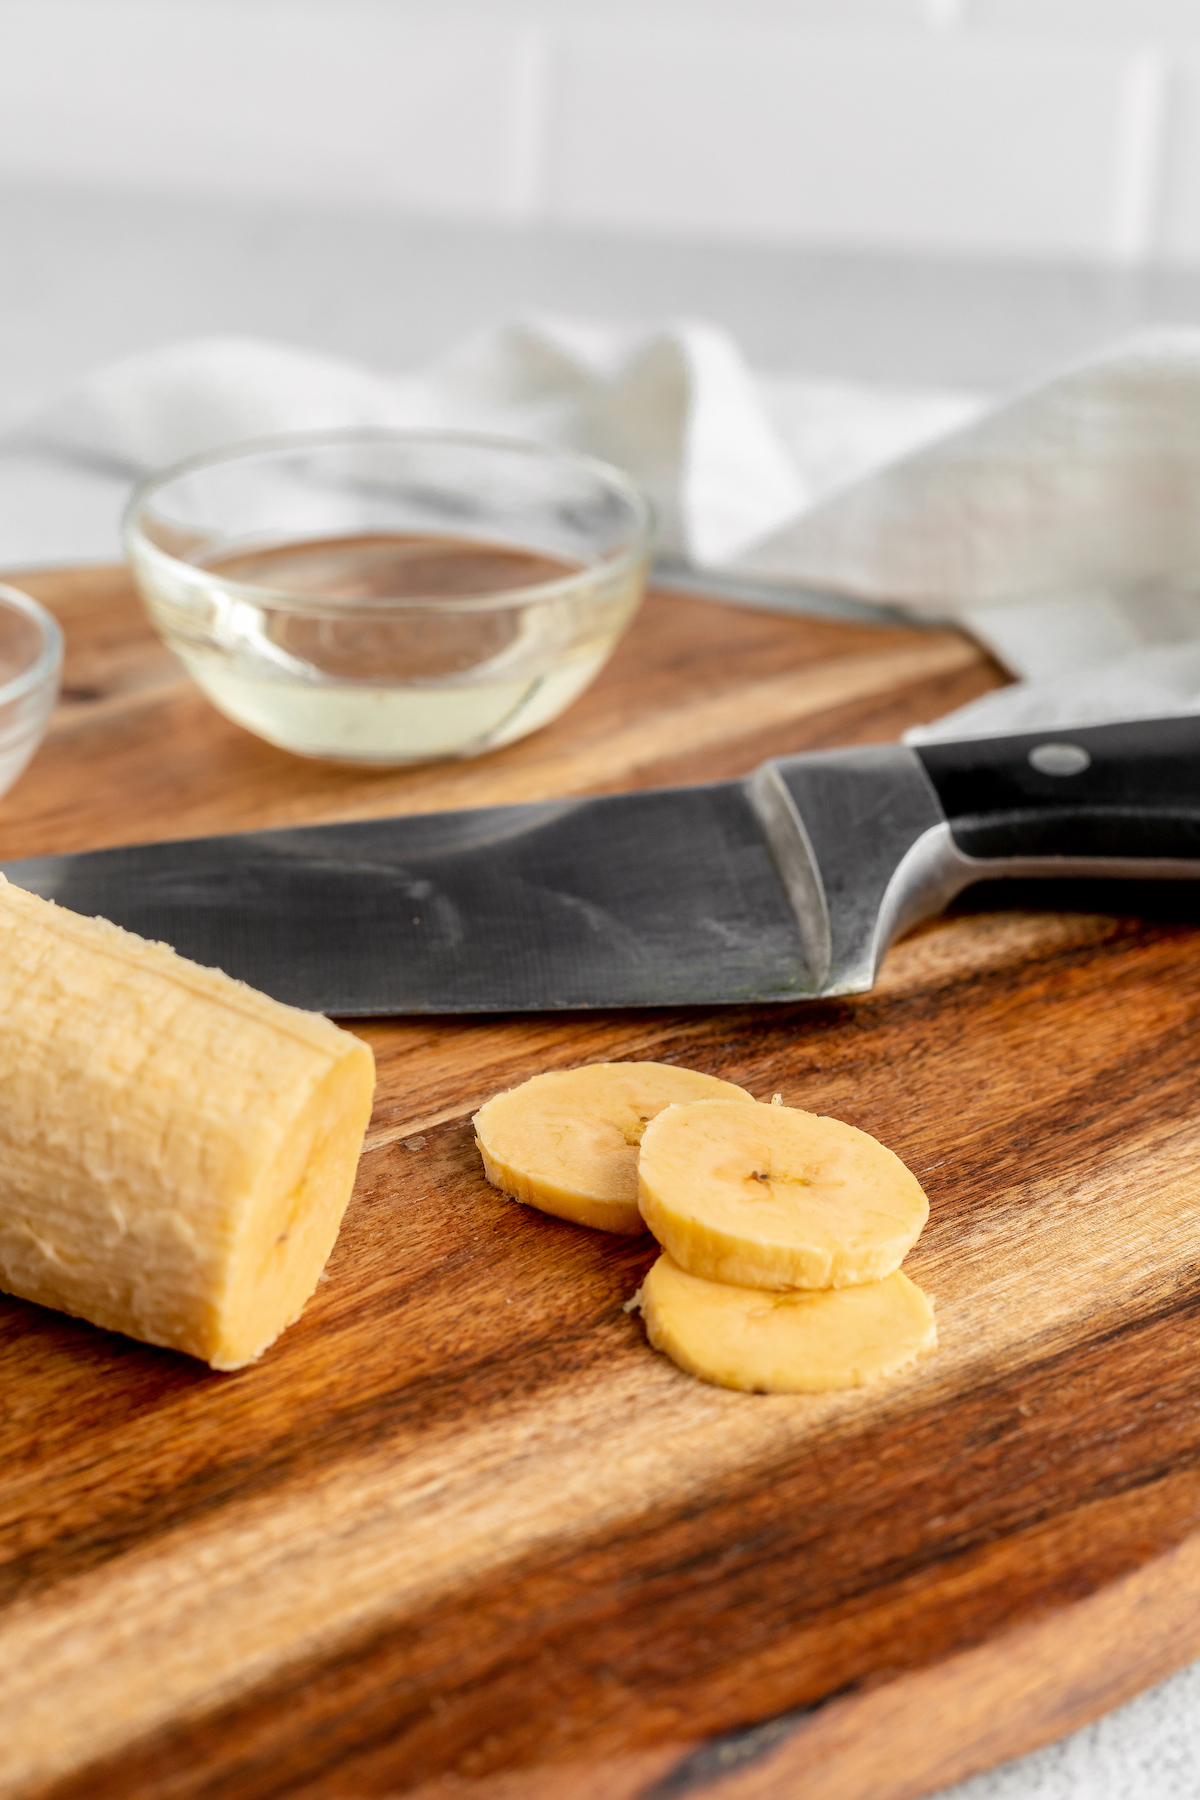 A peeled plantain on a cutting board with a sharp knife. Several slices have been cut from the plantain and are lying next to the knife.